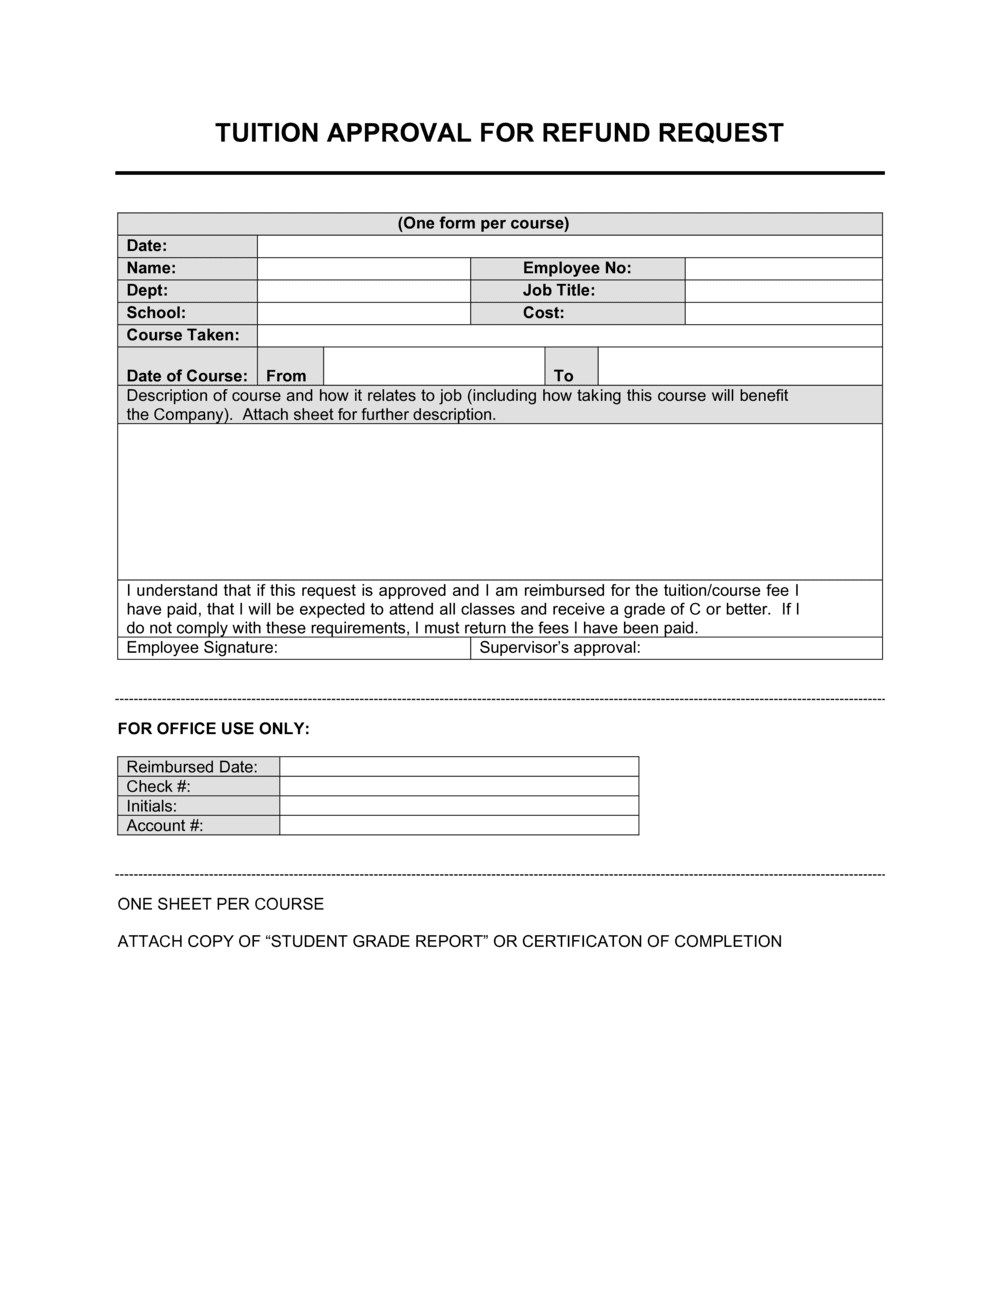 tuition-approval-for-refund-request-template-by-business-in-a-box